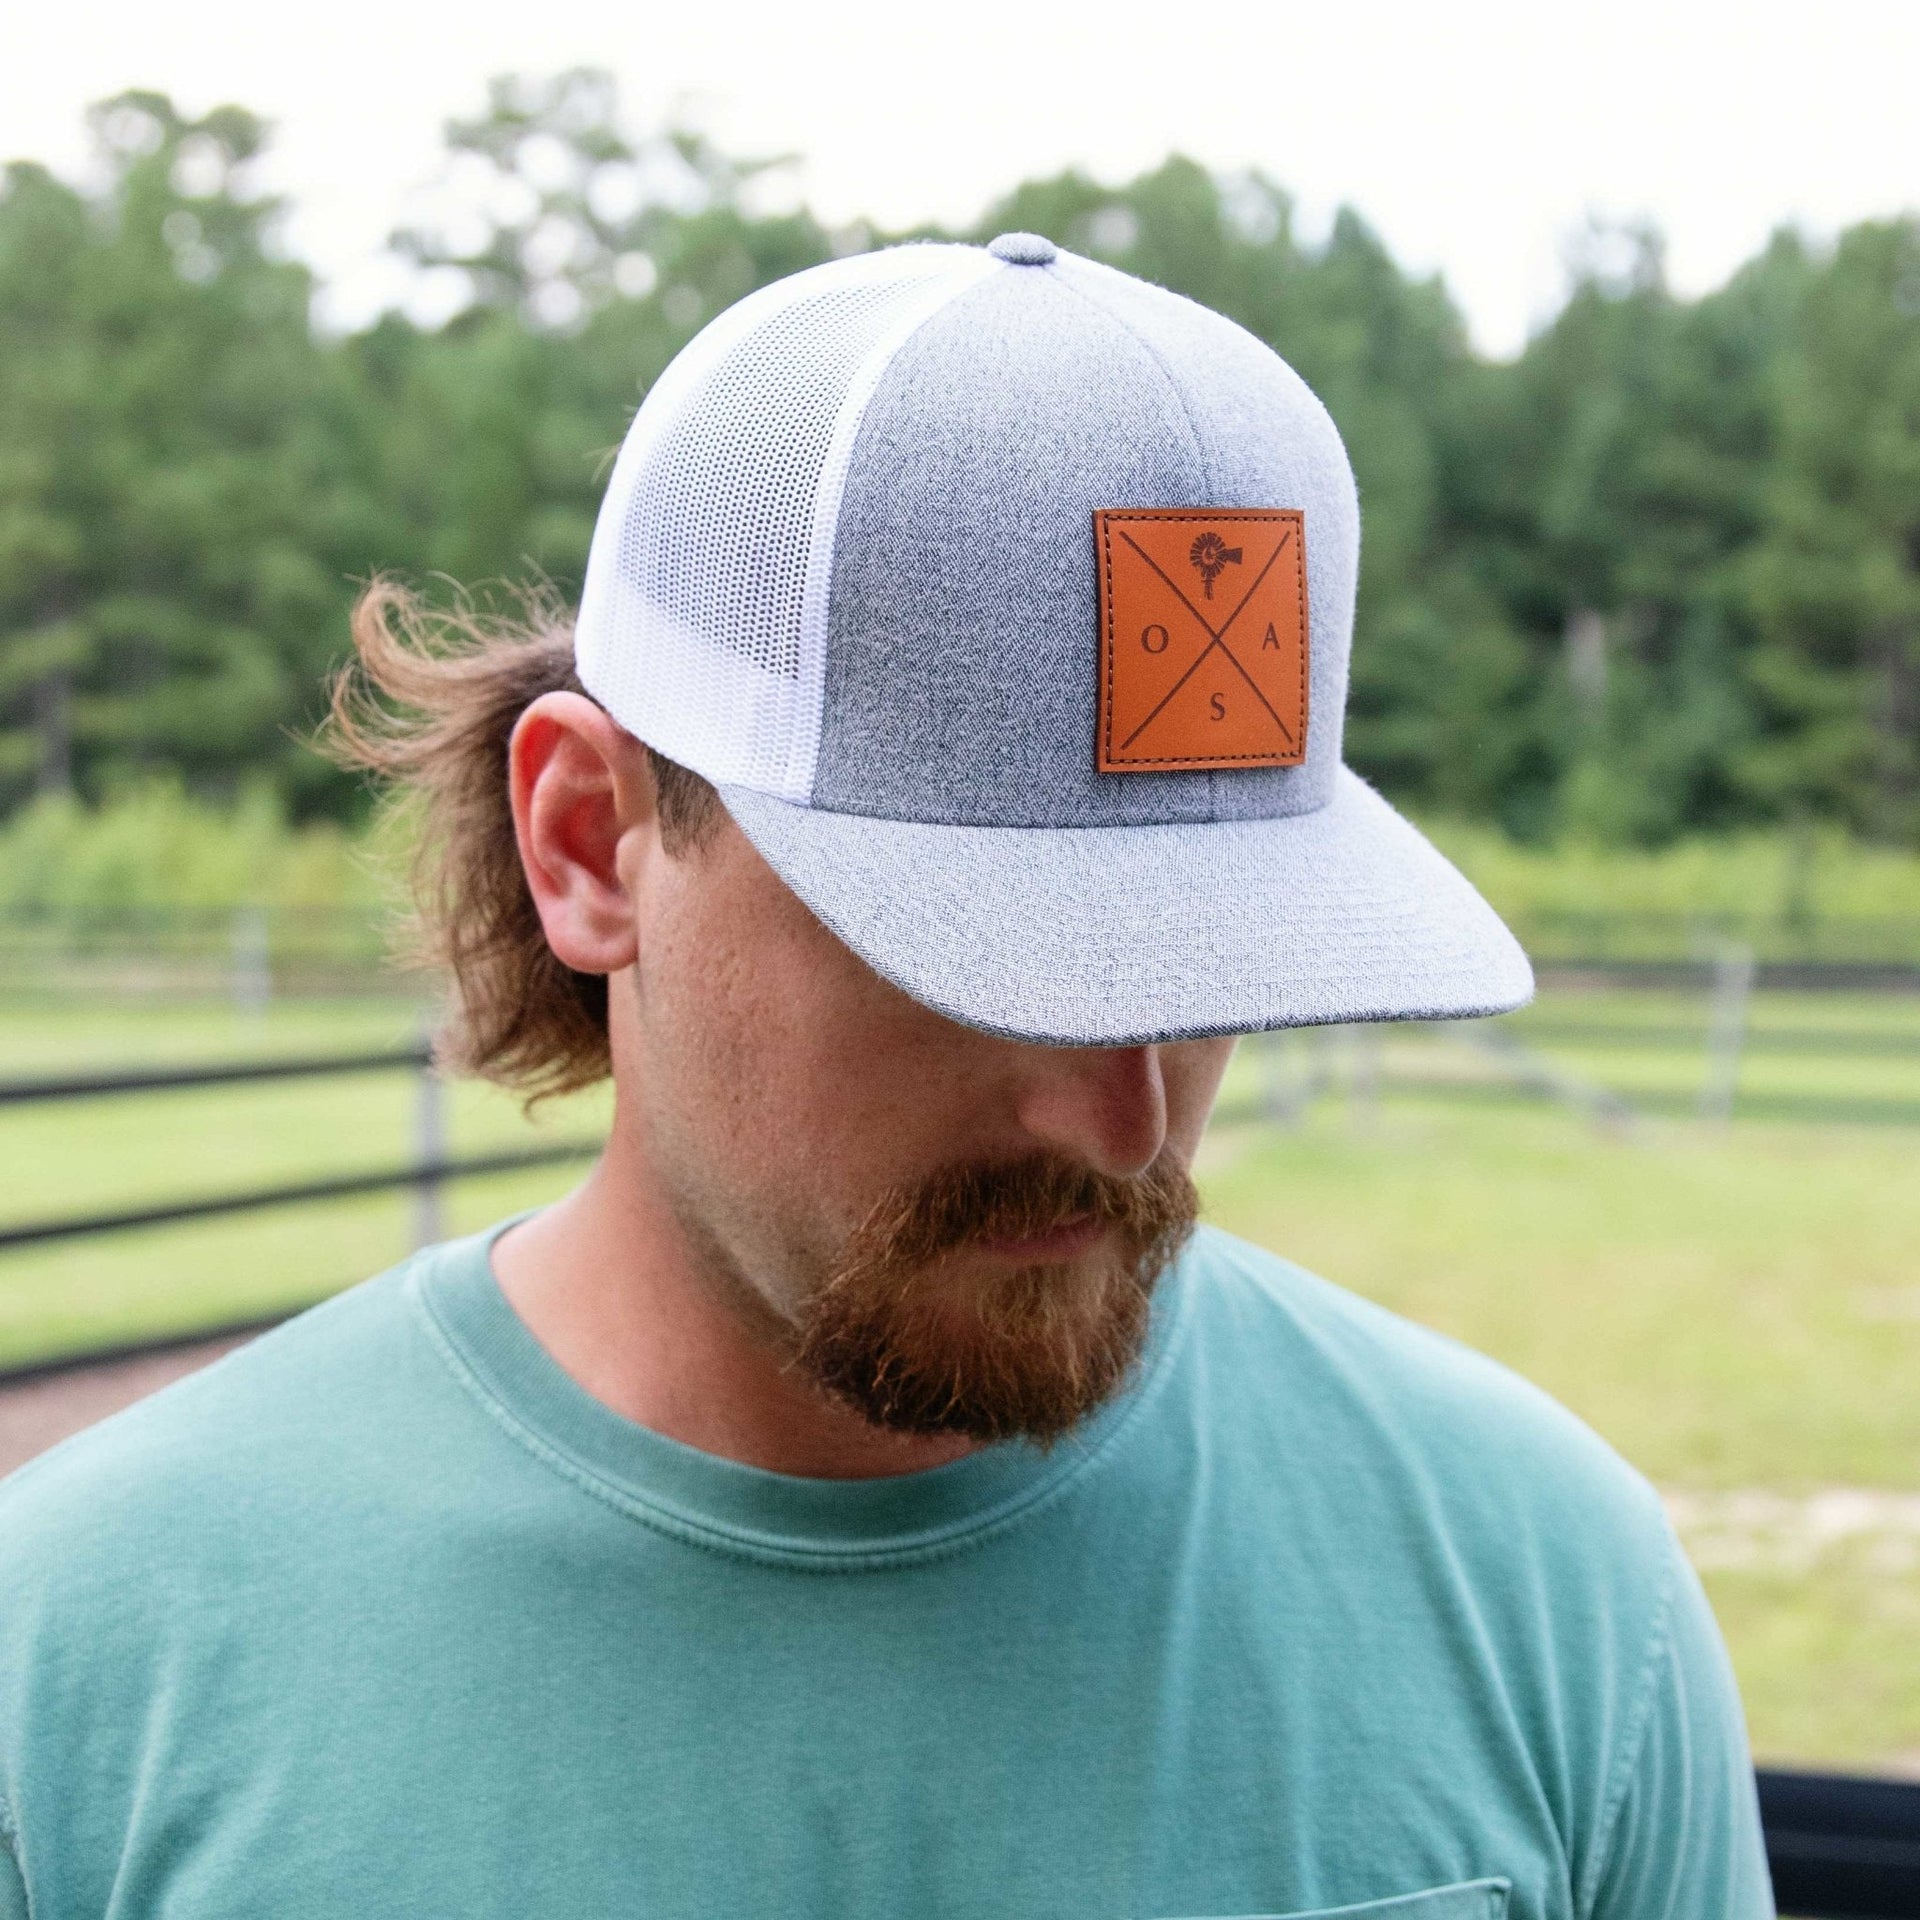 Old South Leather Patch - Trucker Hat Carolina Blue / White